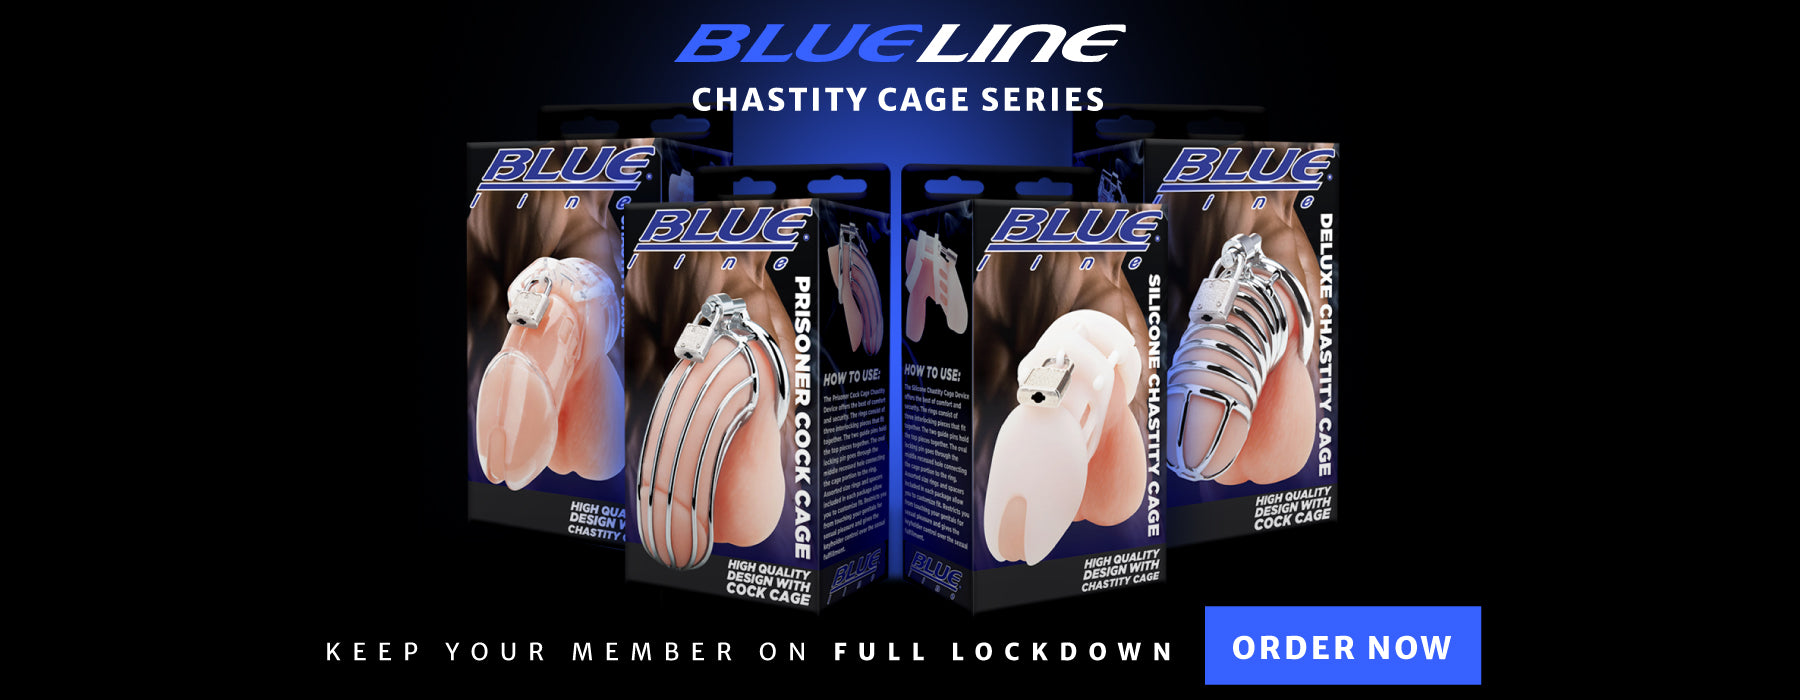 Order the Blueline chastity cage series, keep your member on full lockdown